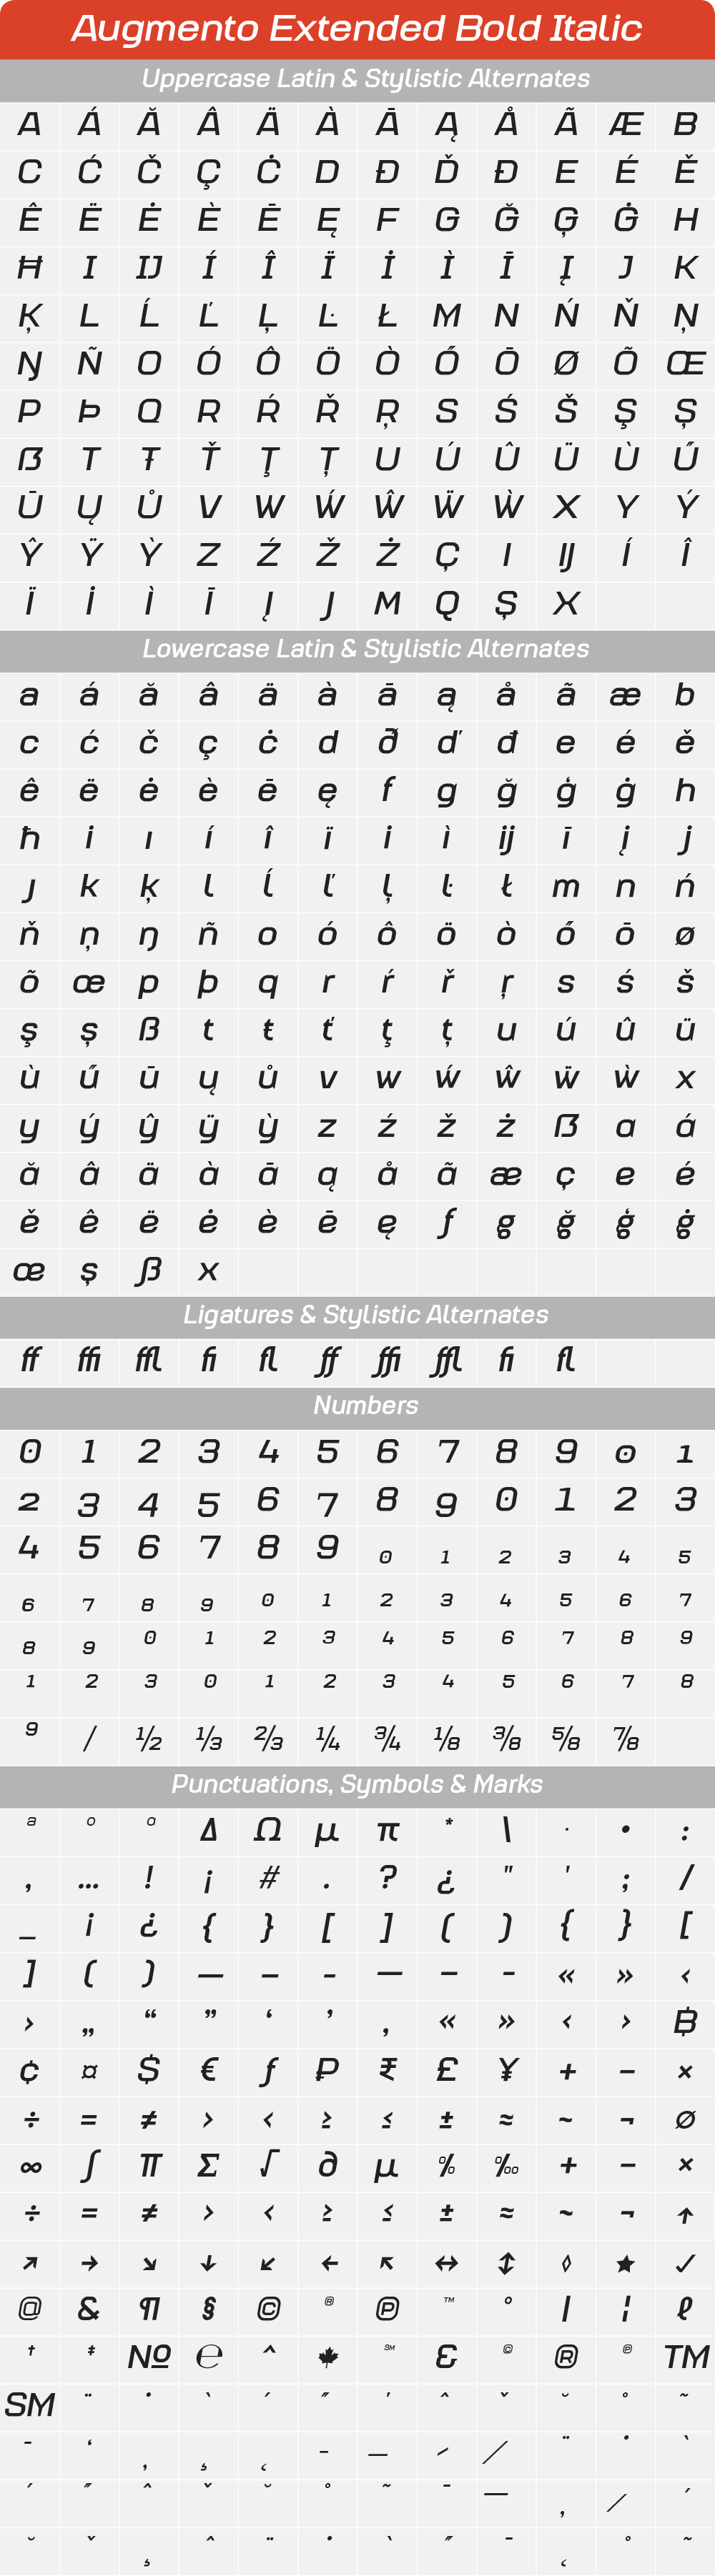 Extended Bold ItalicAugmento-GlyphTable.png